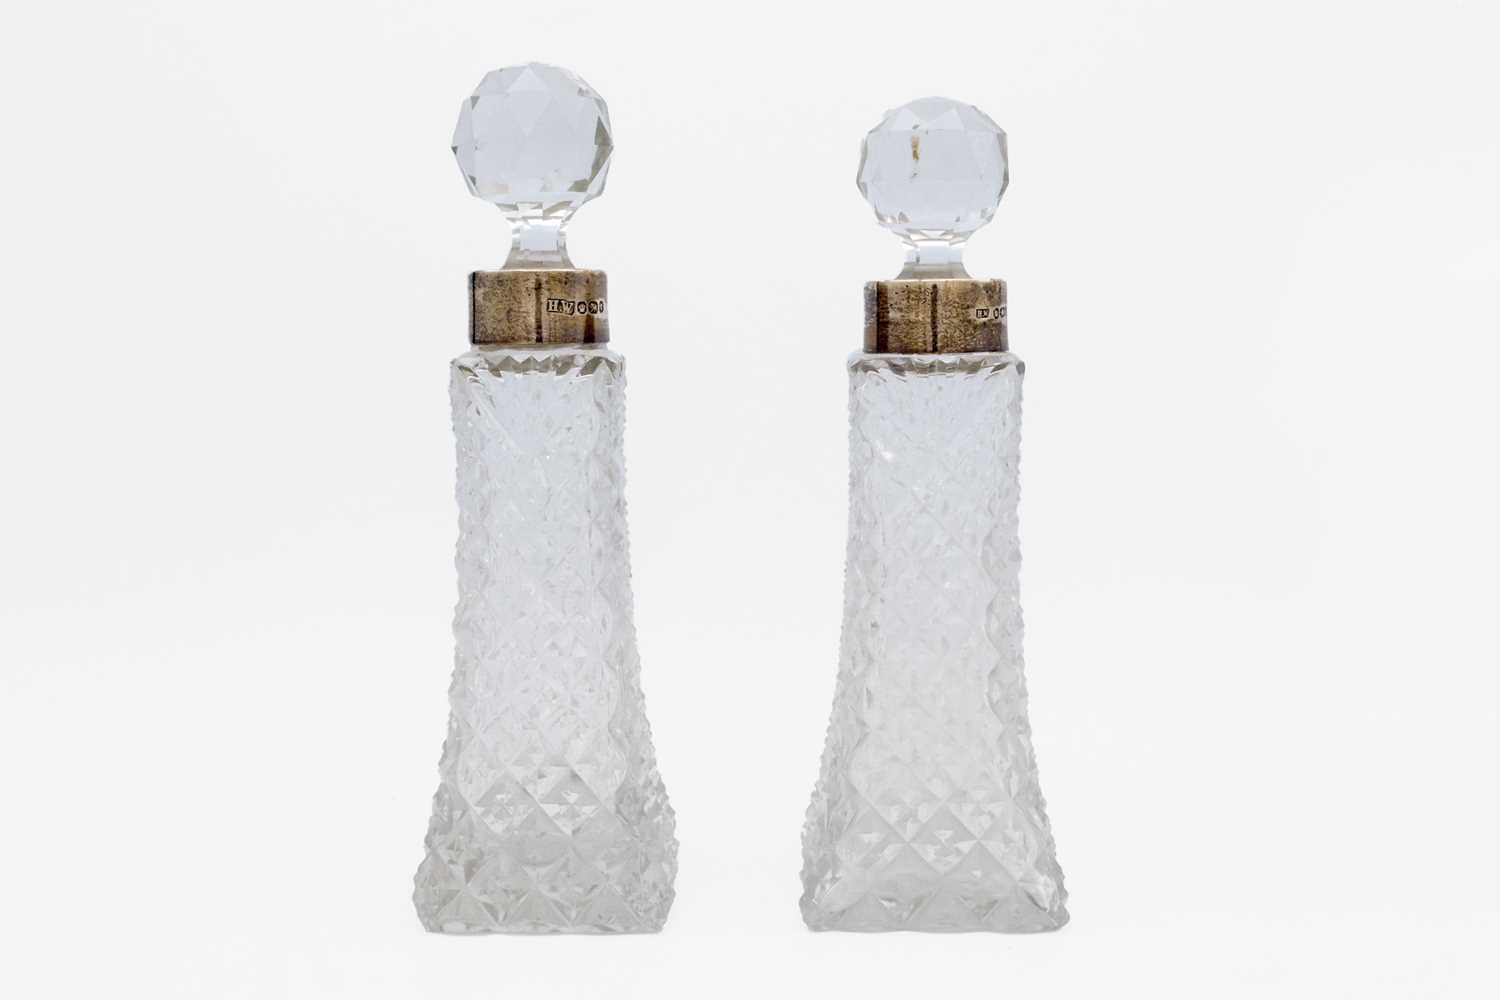 Lot 7 - A pair of Victorian silver-mounted cut glass decanters by Lee & Wigfull.